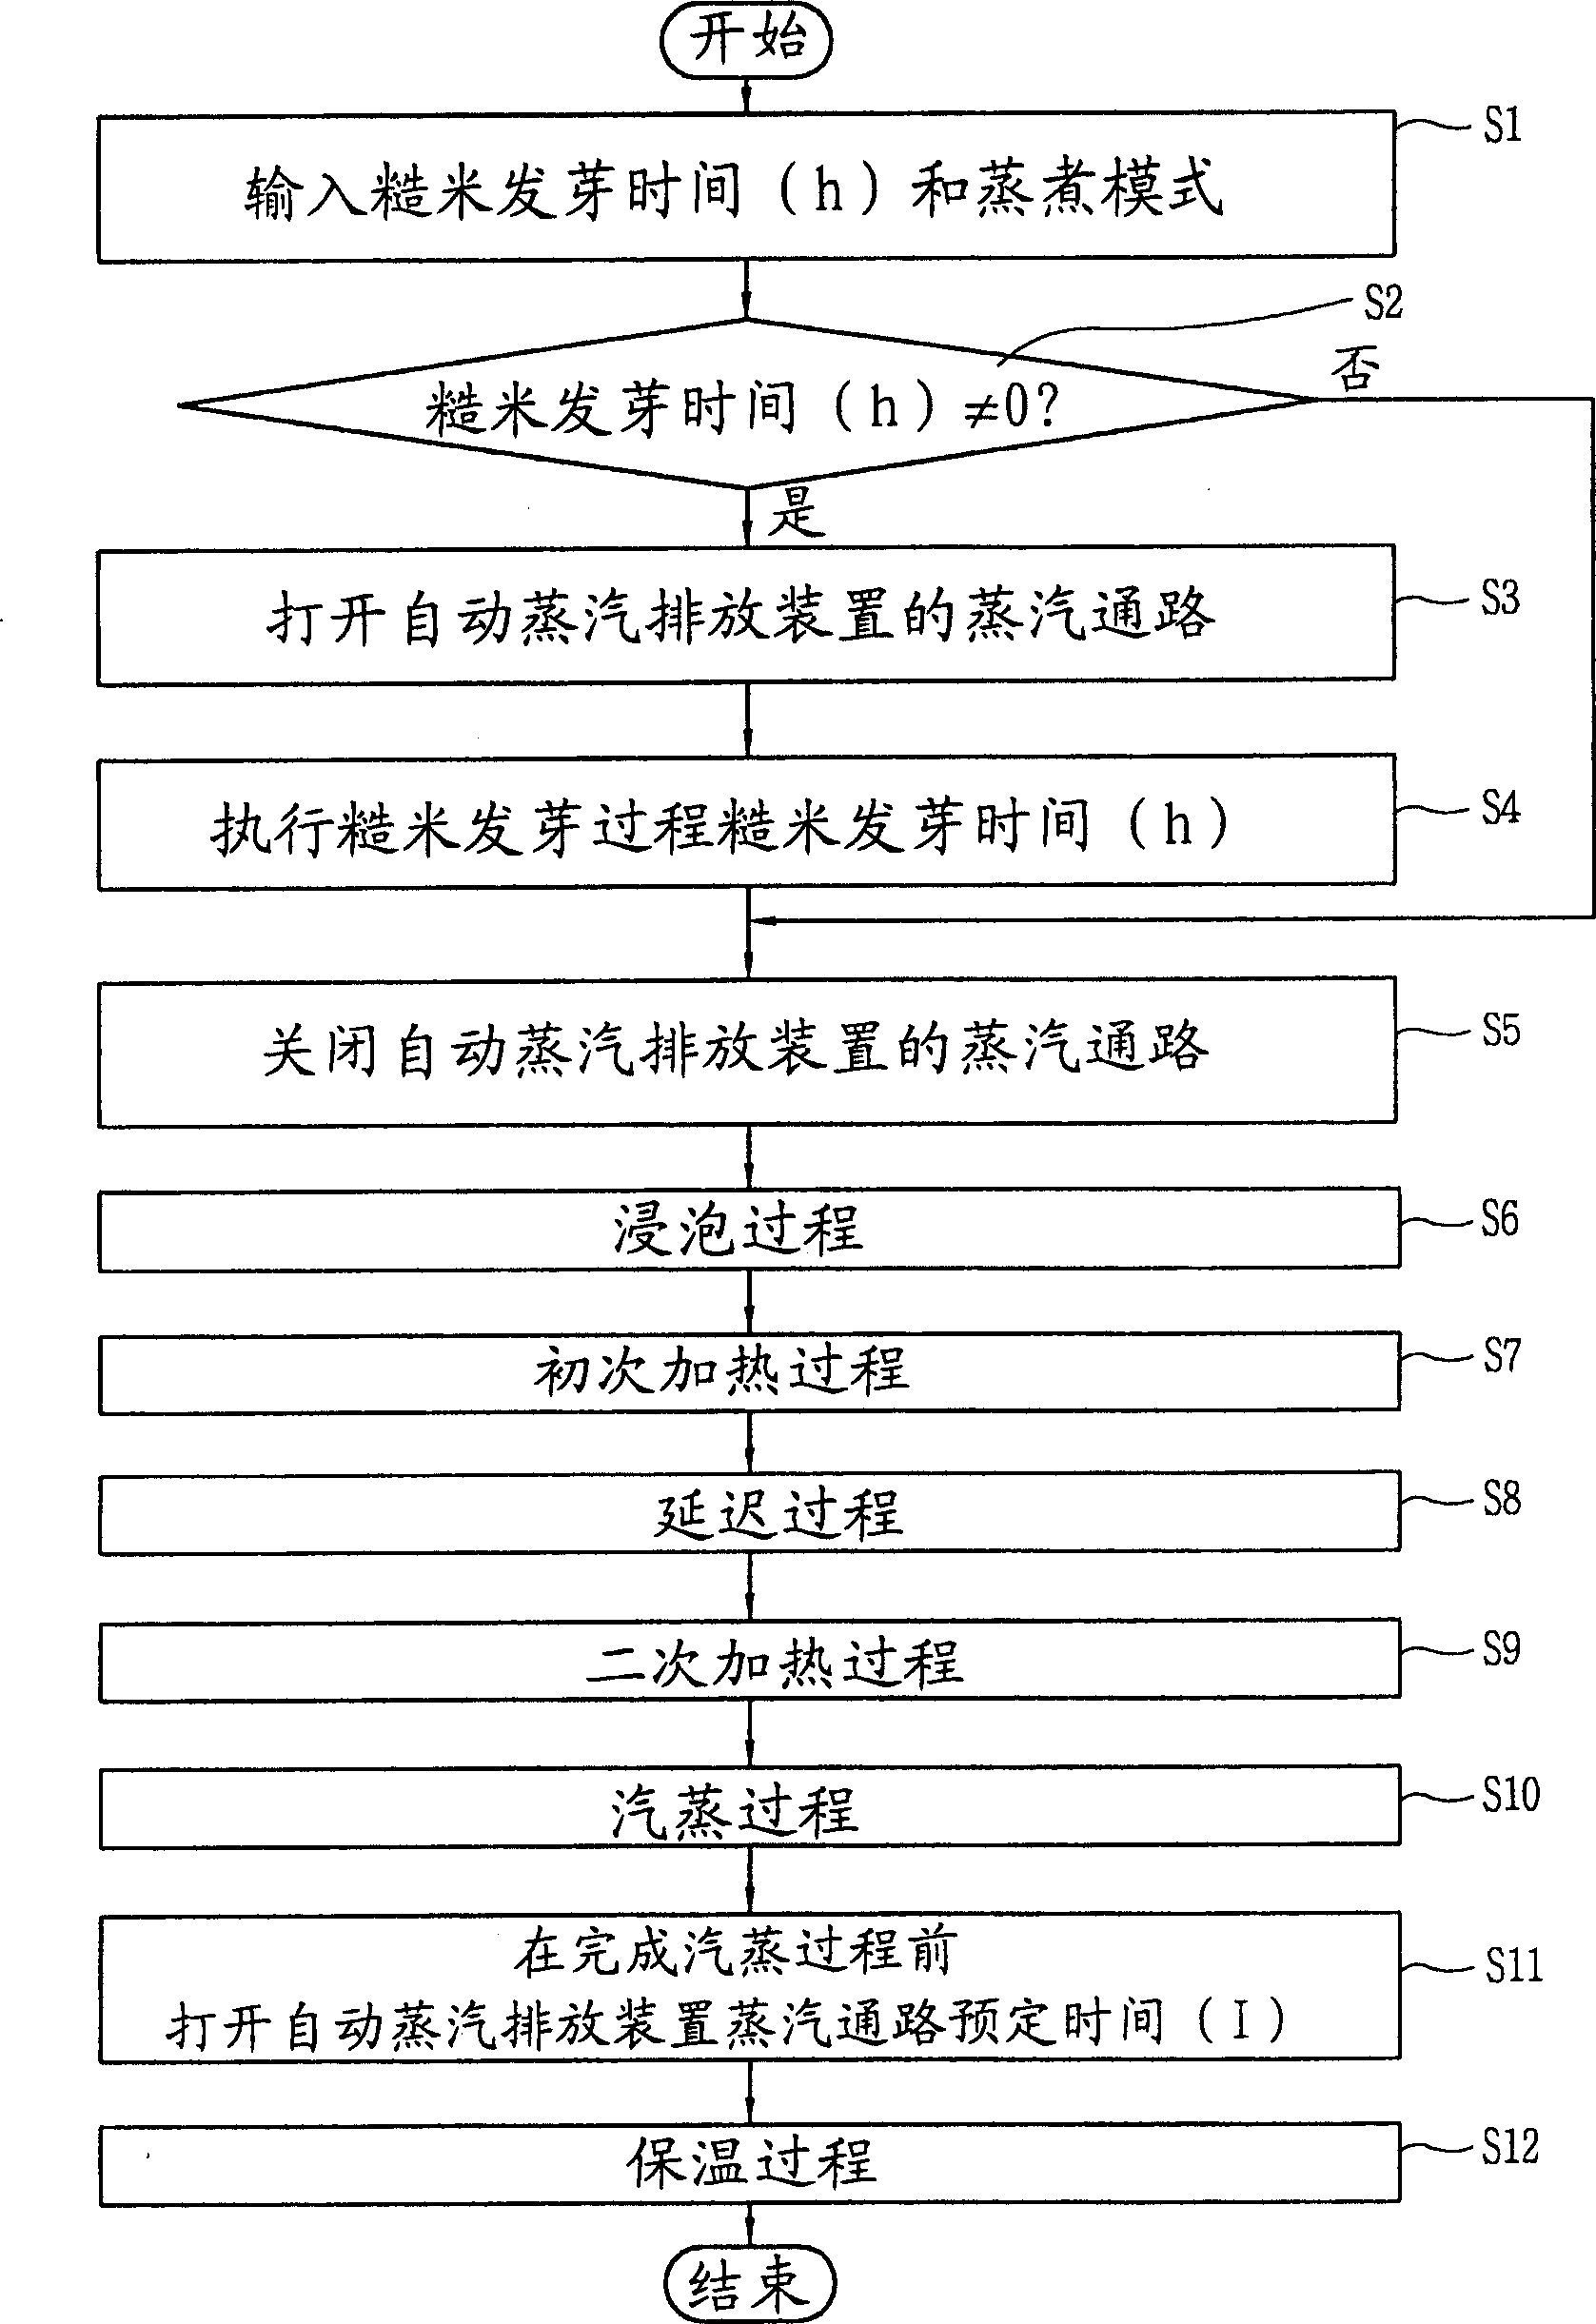 Control device and method for pressure cooker for brown rice germiation and cooking